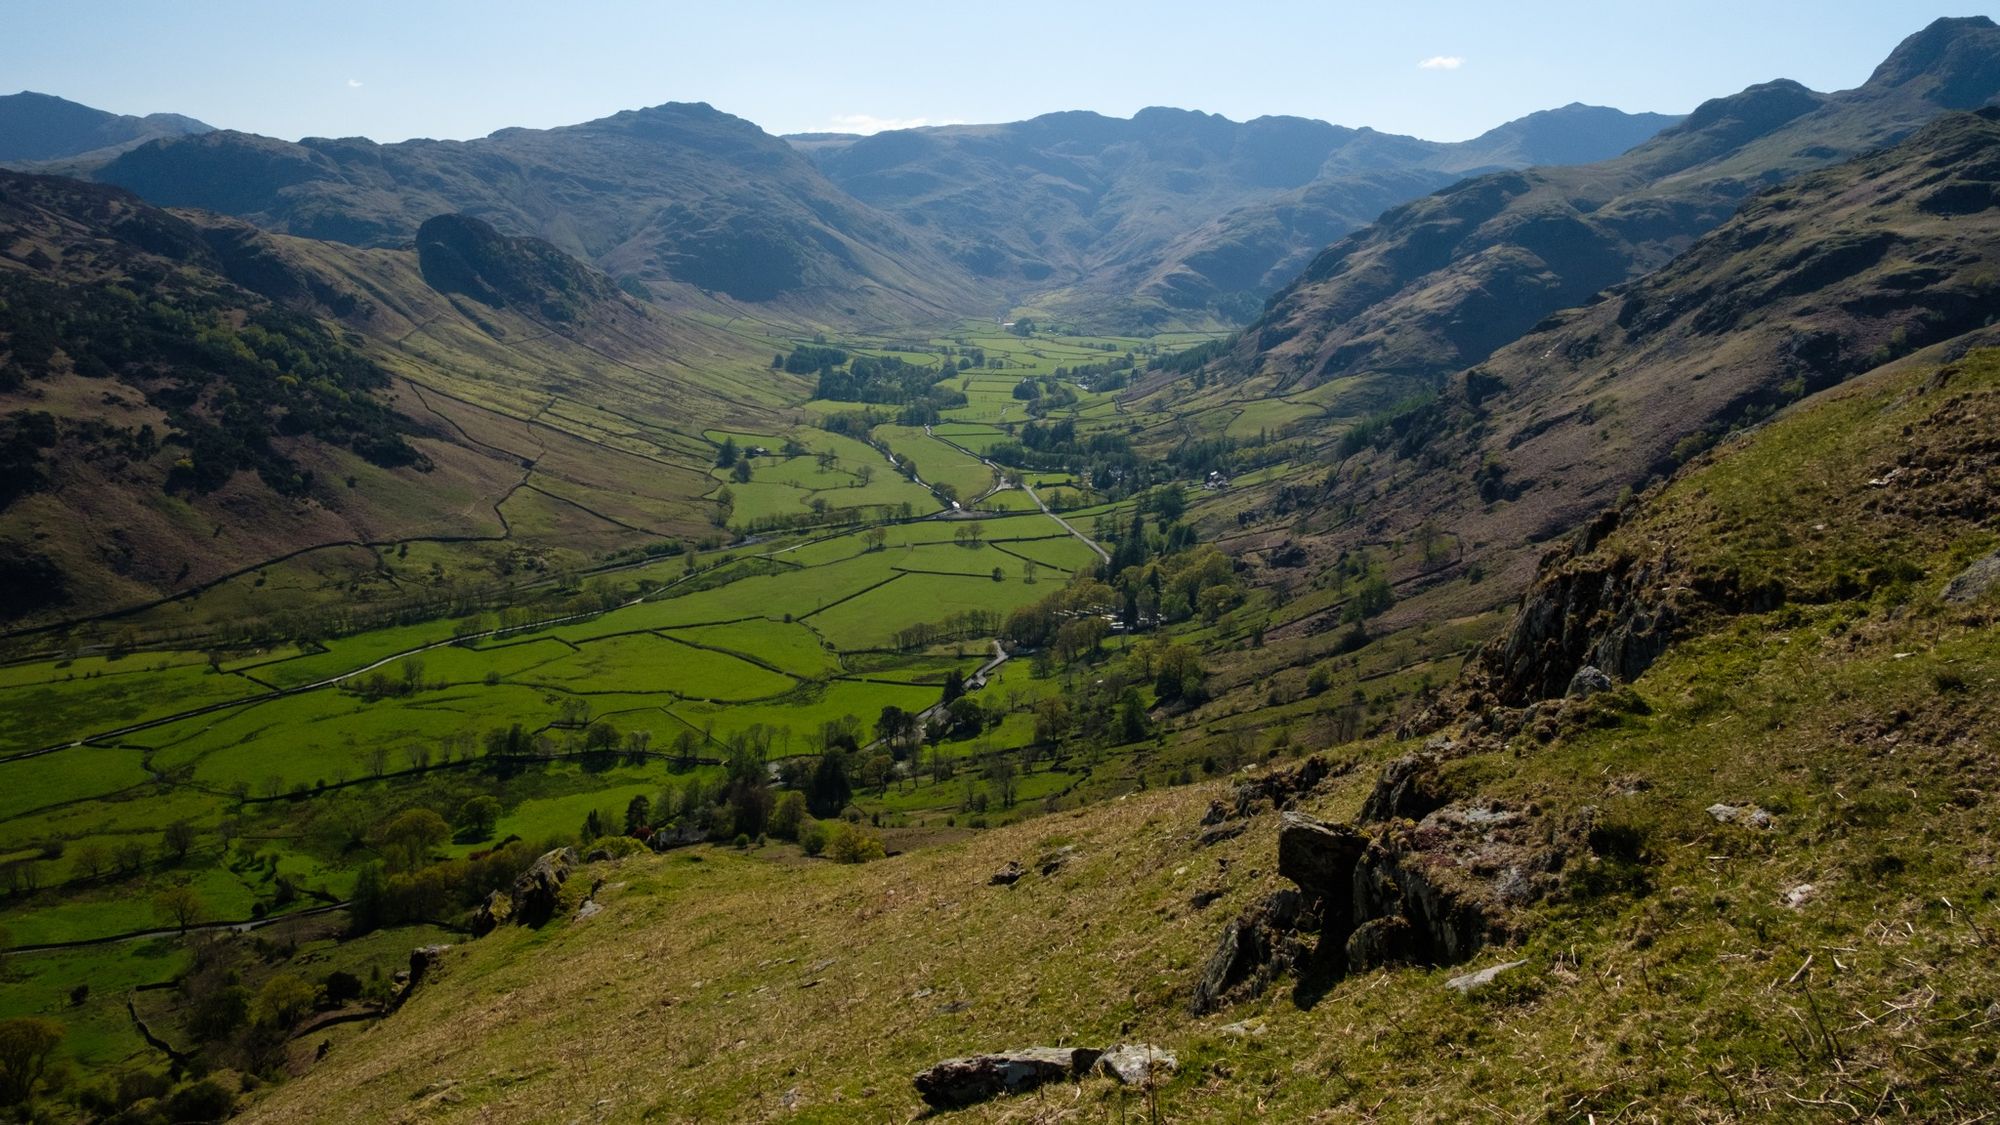 Nearing the end of the circuit, looking back to the Langdale skyline